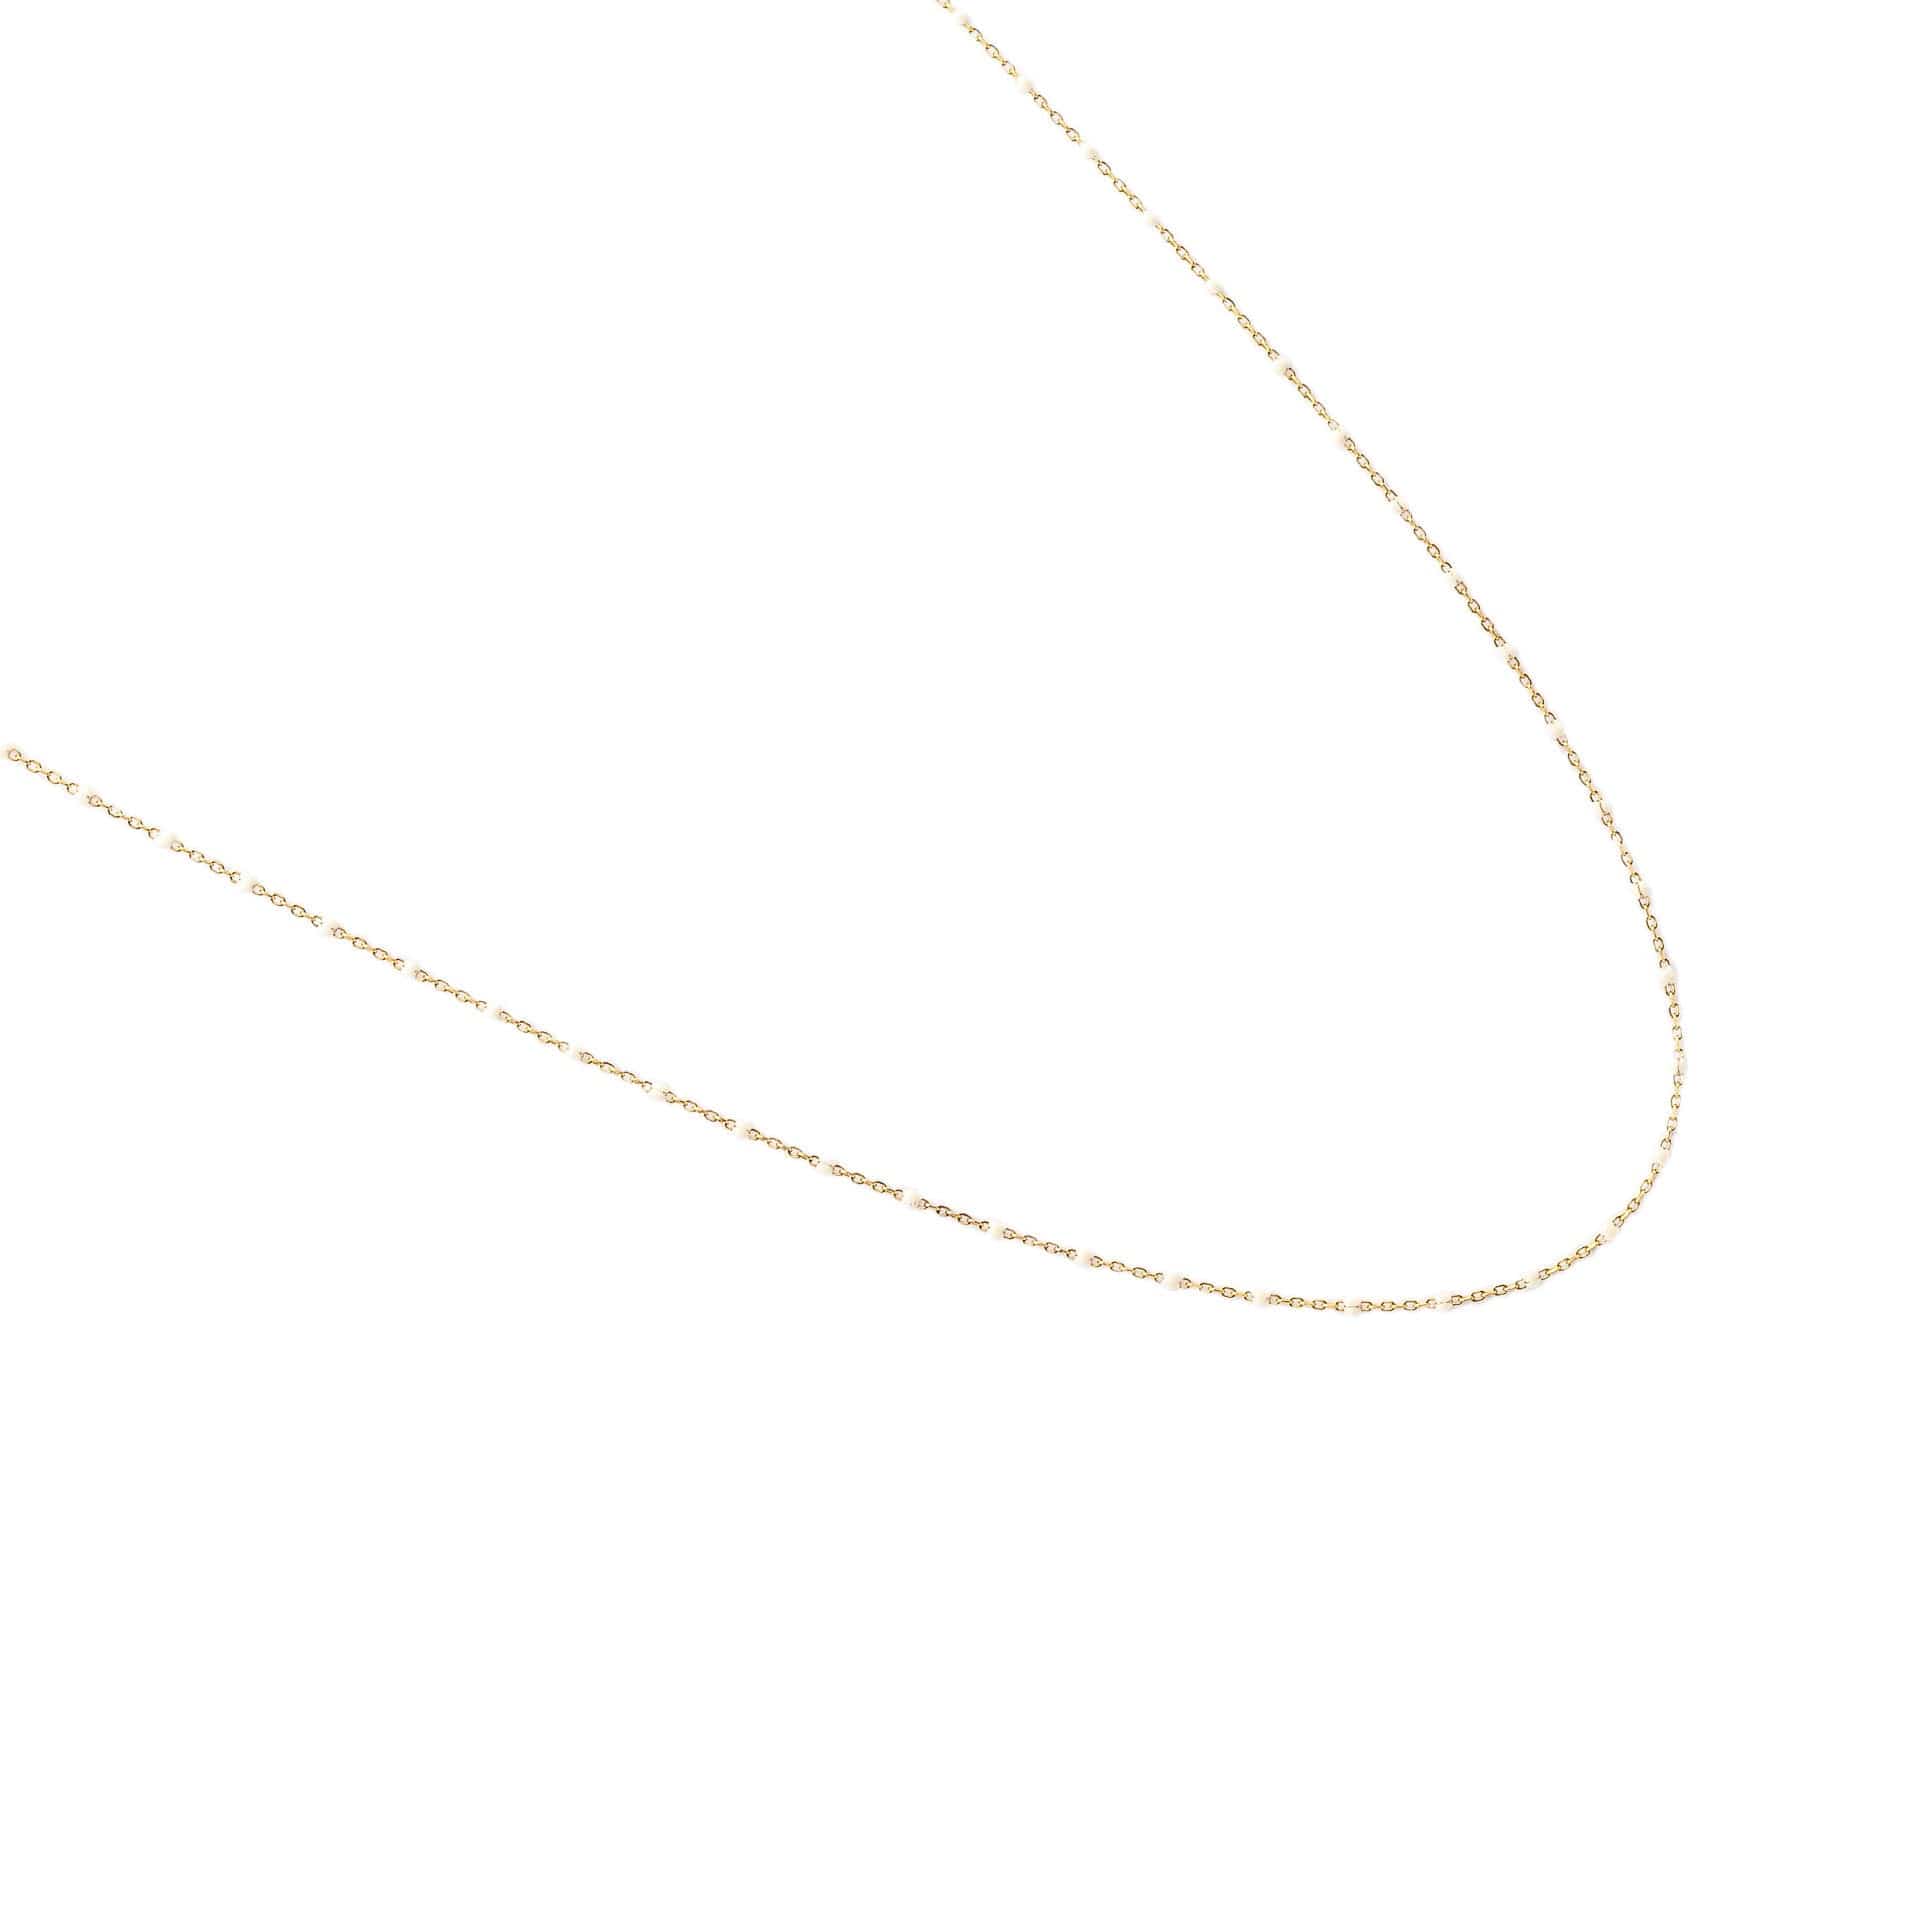 TAI JEWELRY Necklace Gold Vermeil 34" Enamel Beaded Necklace (White)